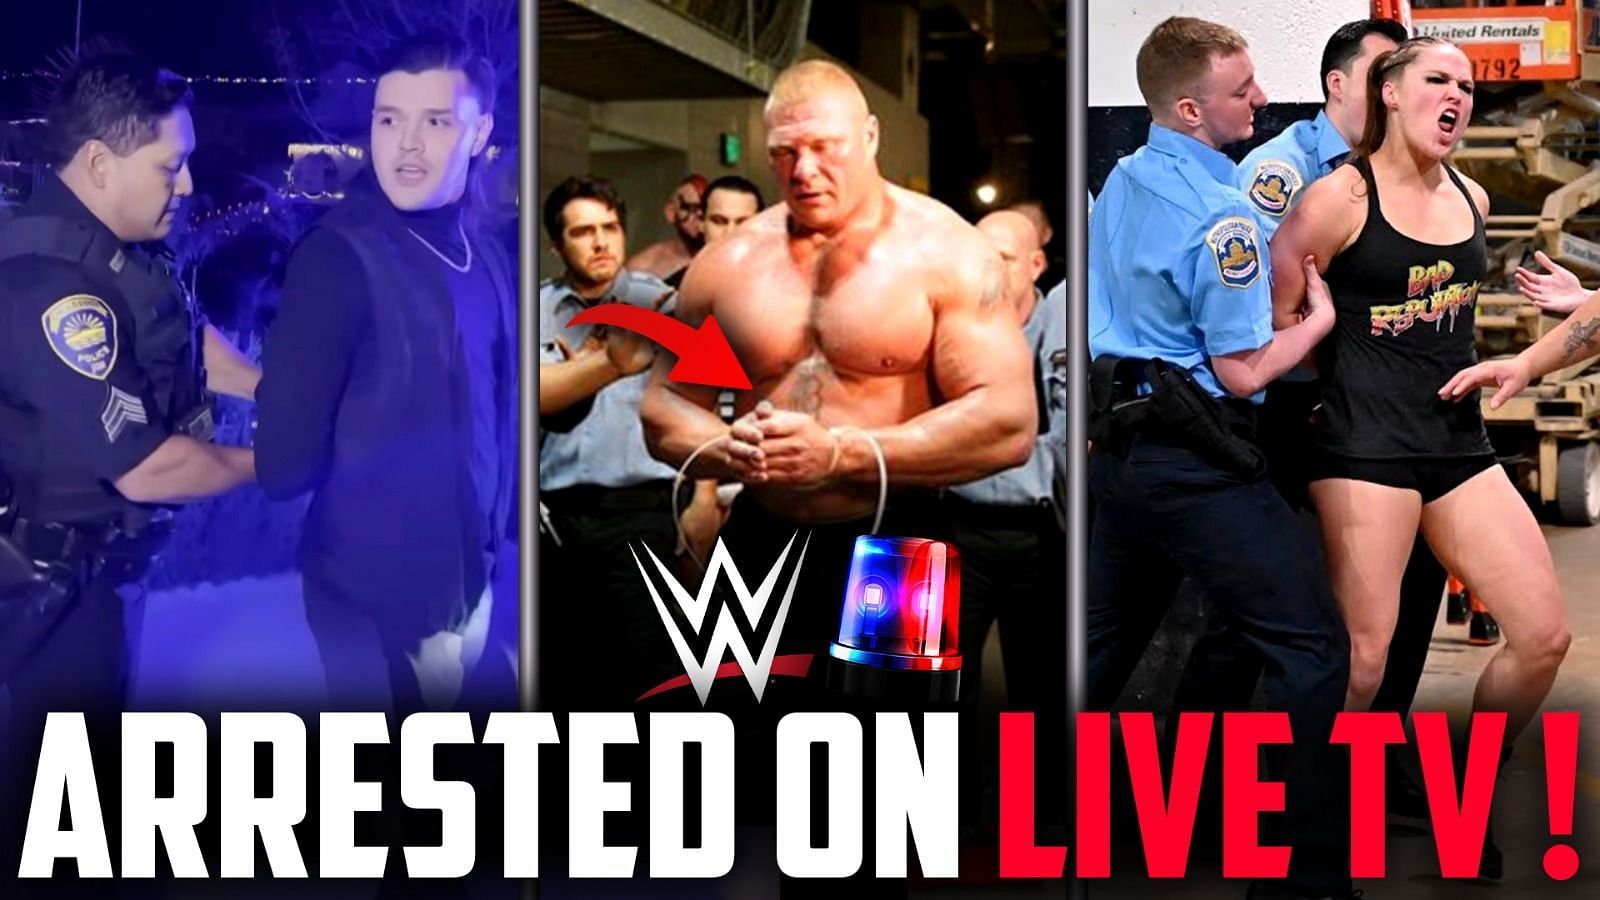 Times when WWE Superstars were arrested on TV